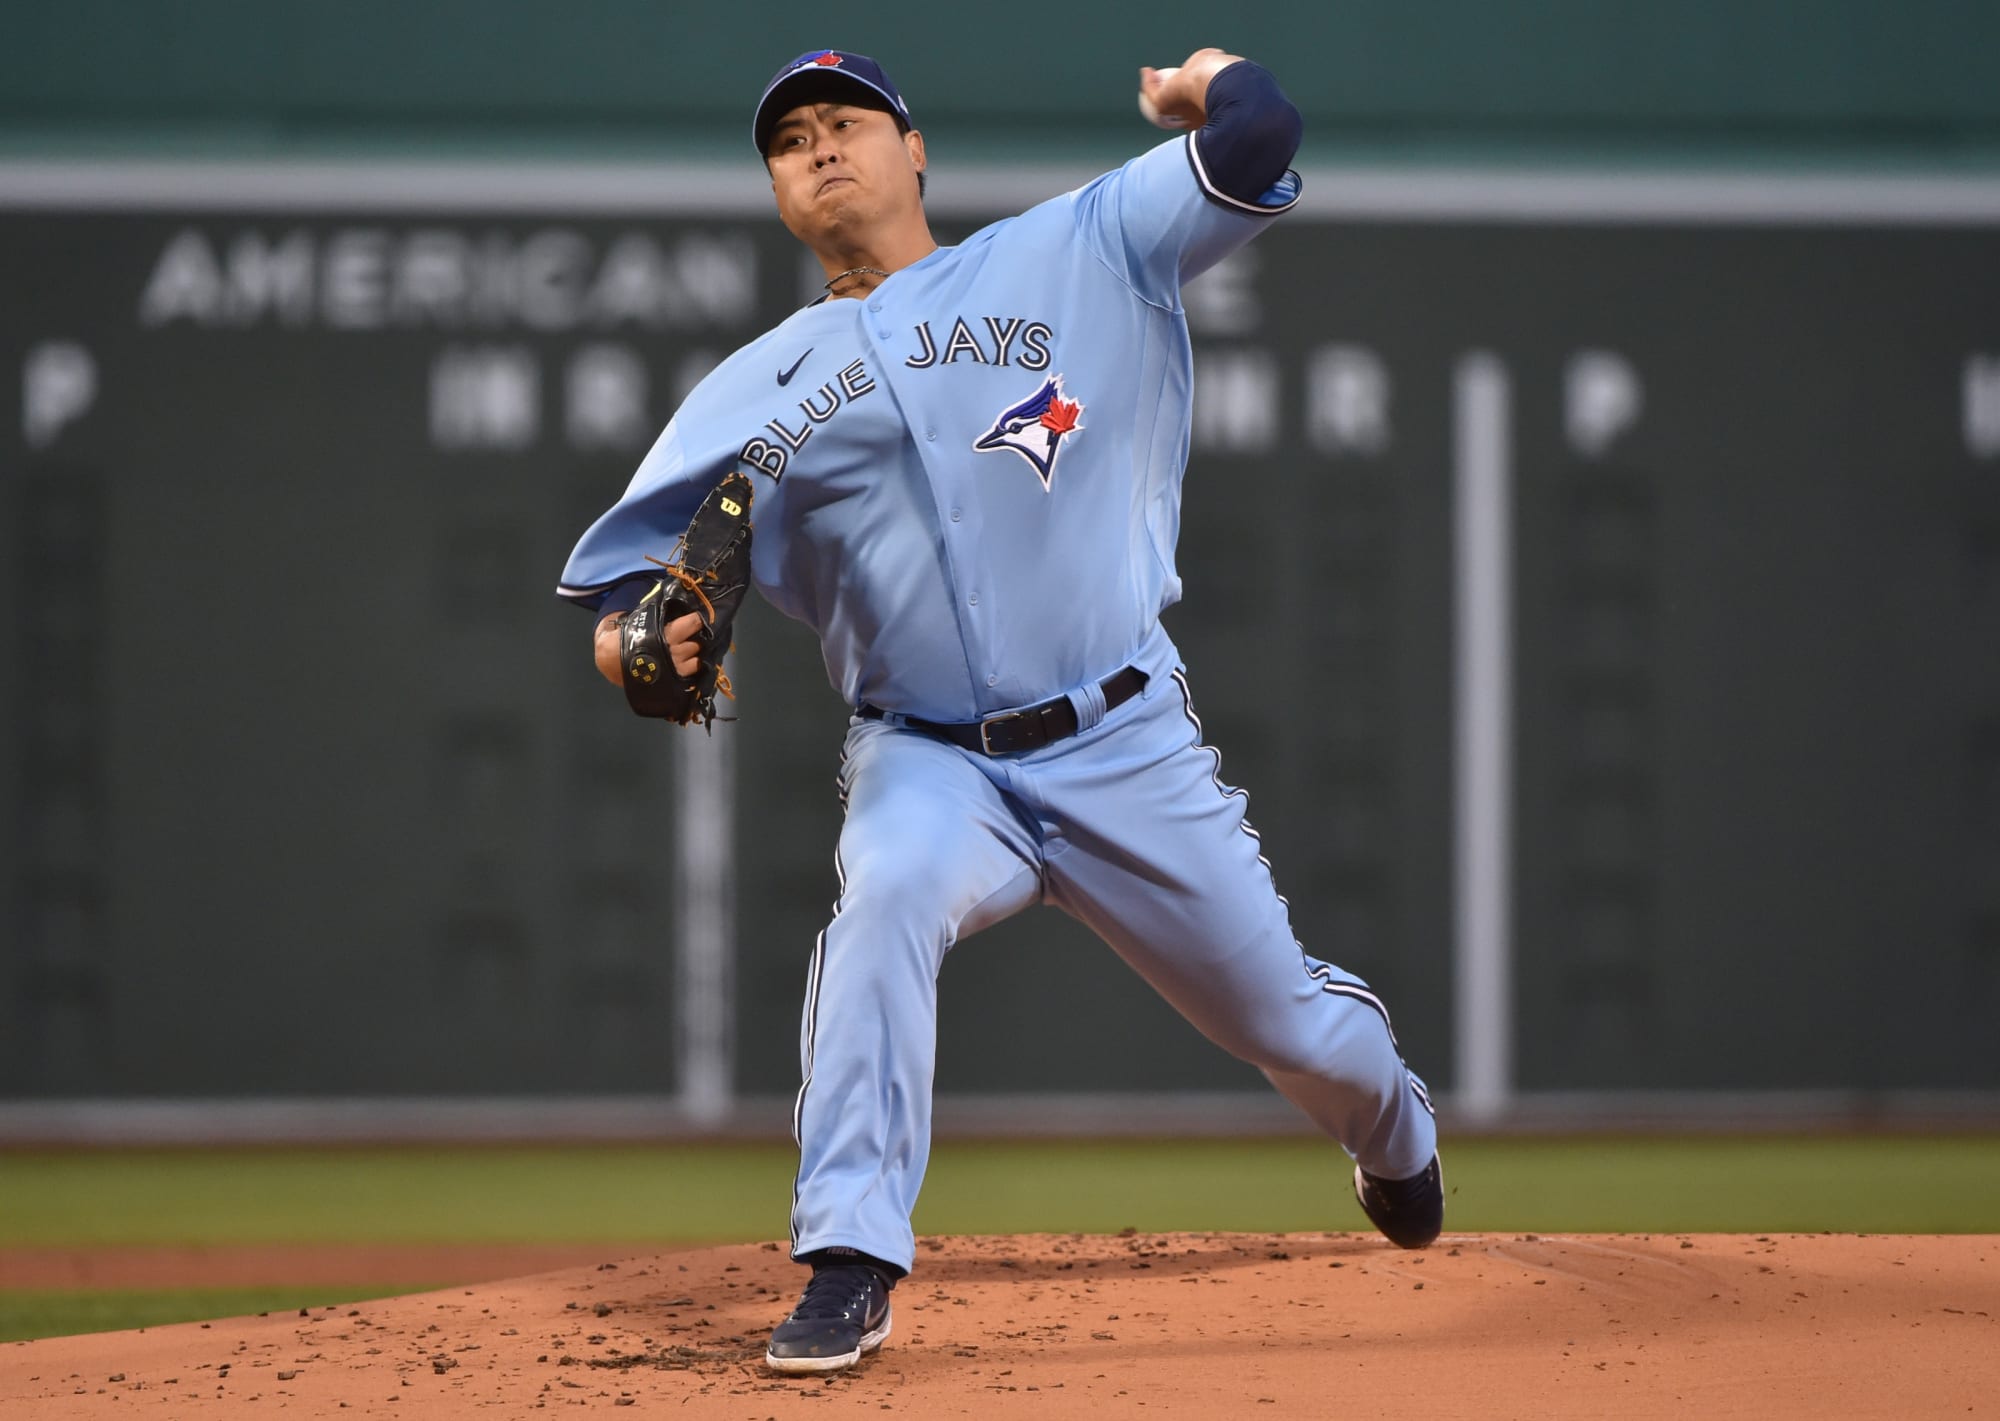 Blue Jays Taking a look at some of the pitching staff's best offerings